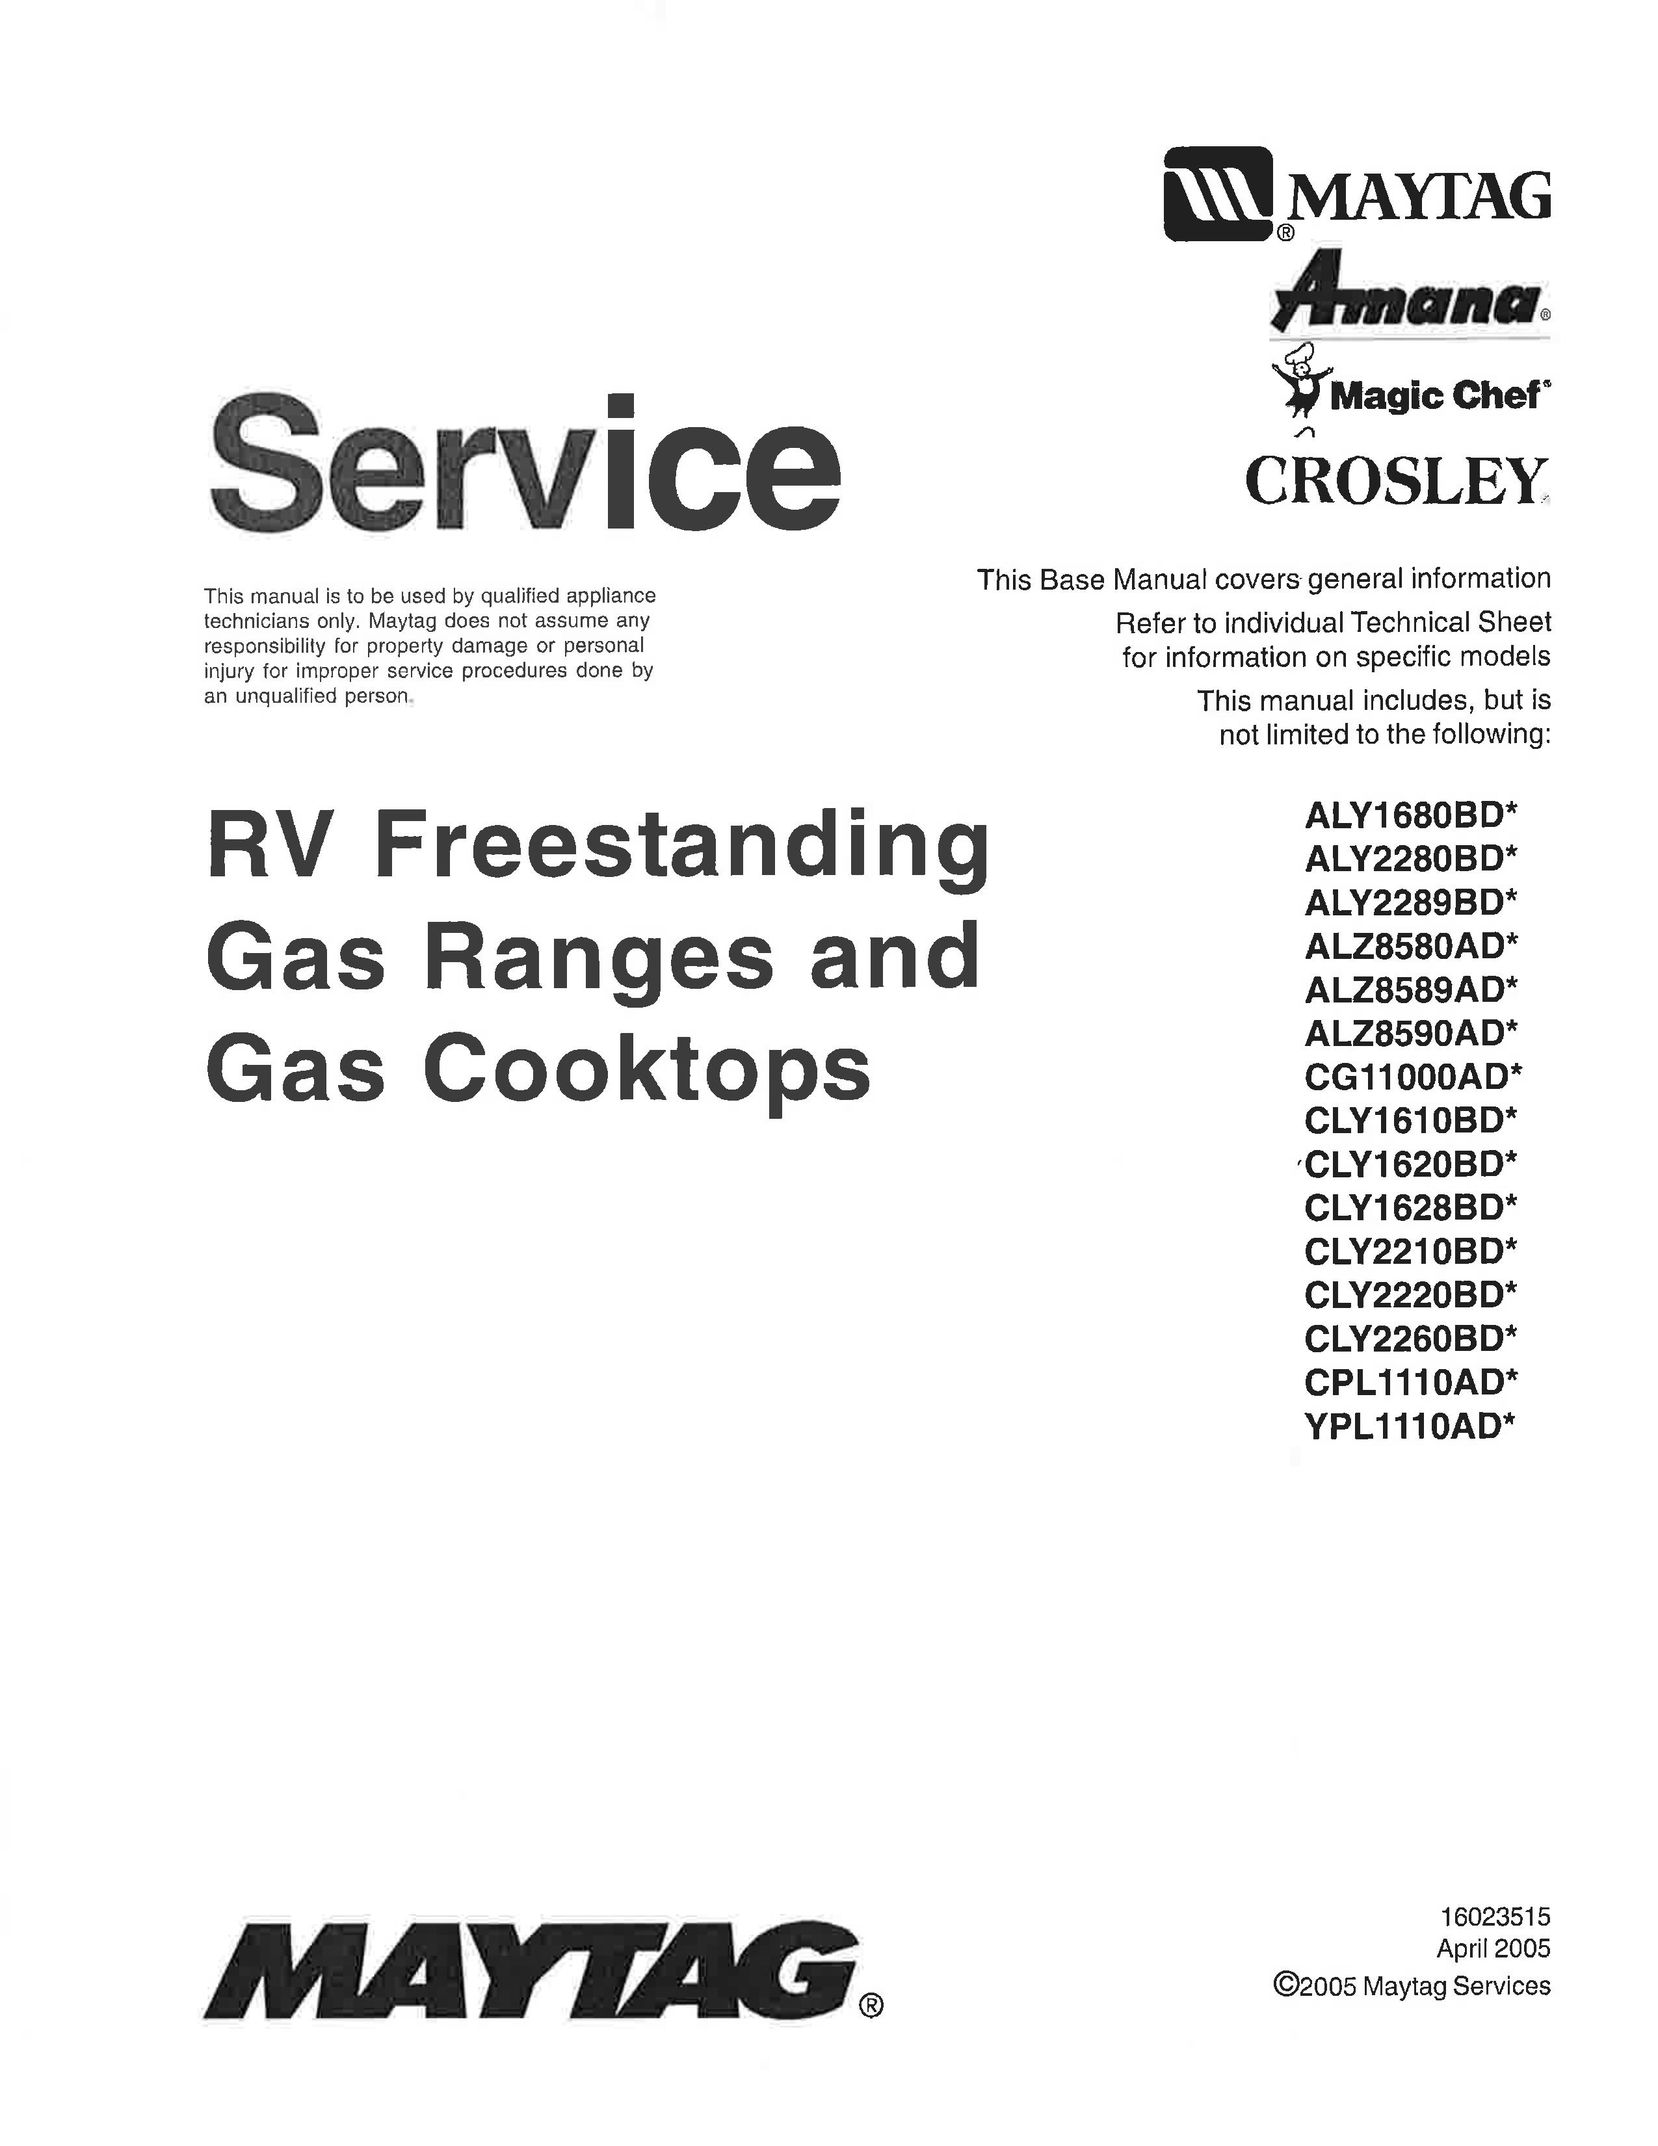 Maytag CLY1628BD Cooktop User Manual